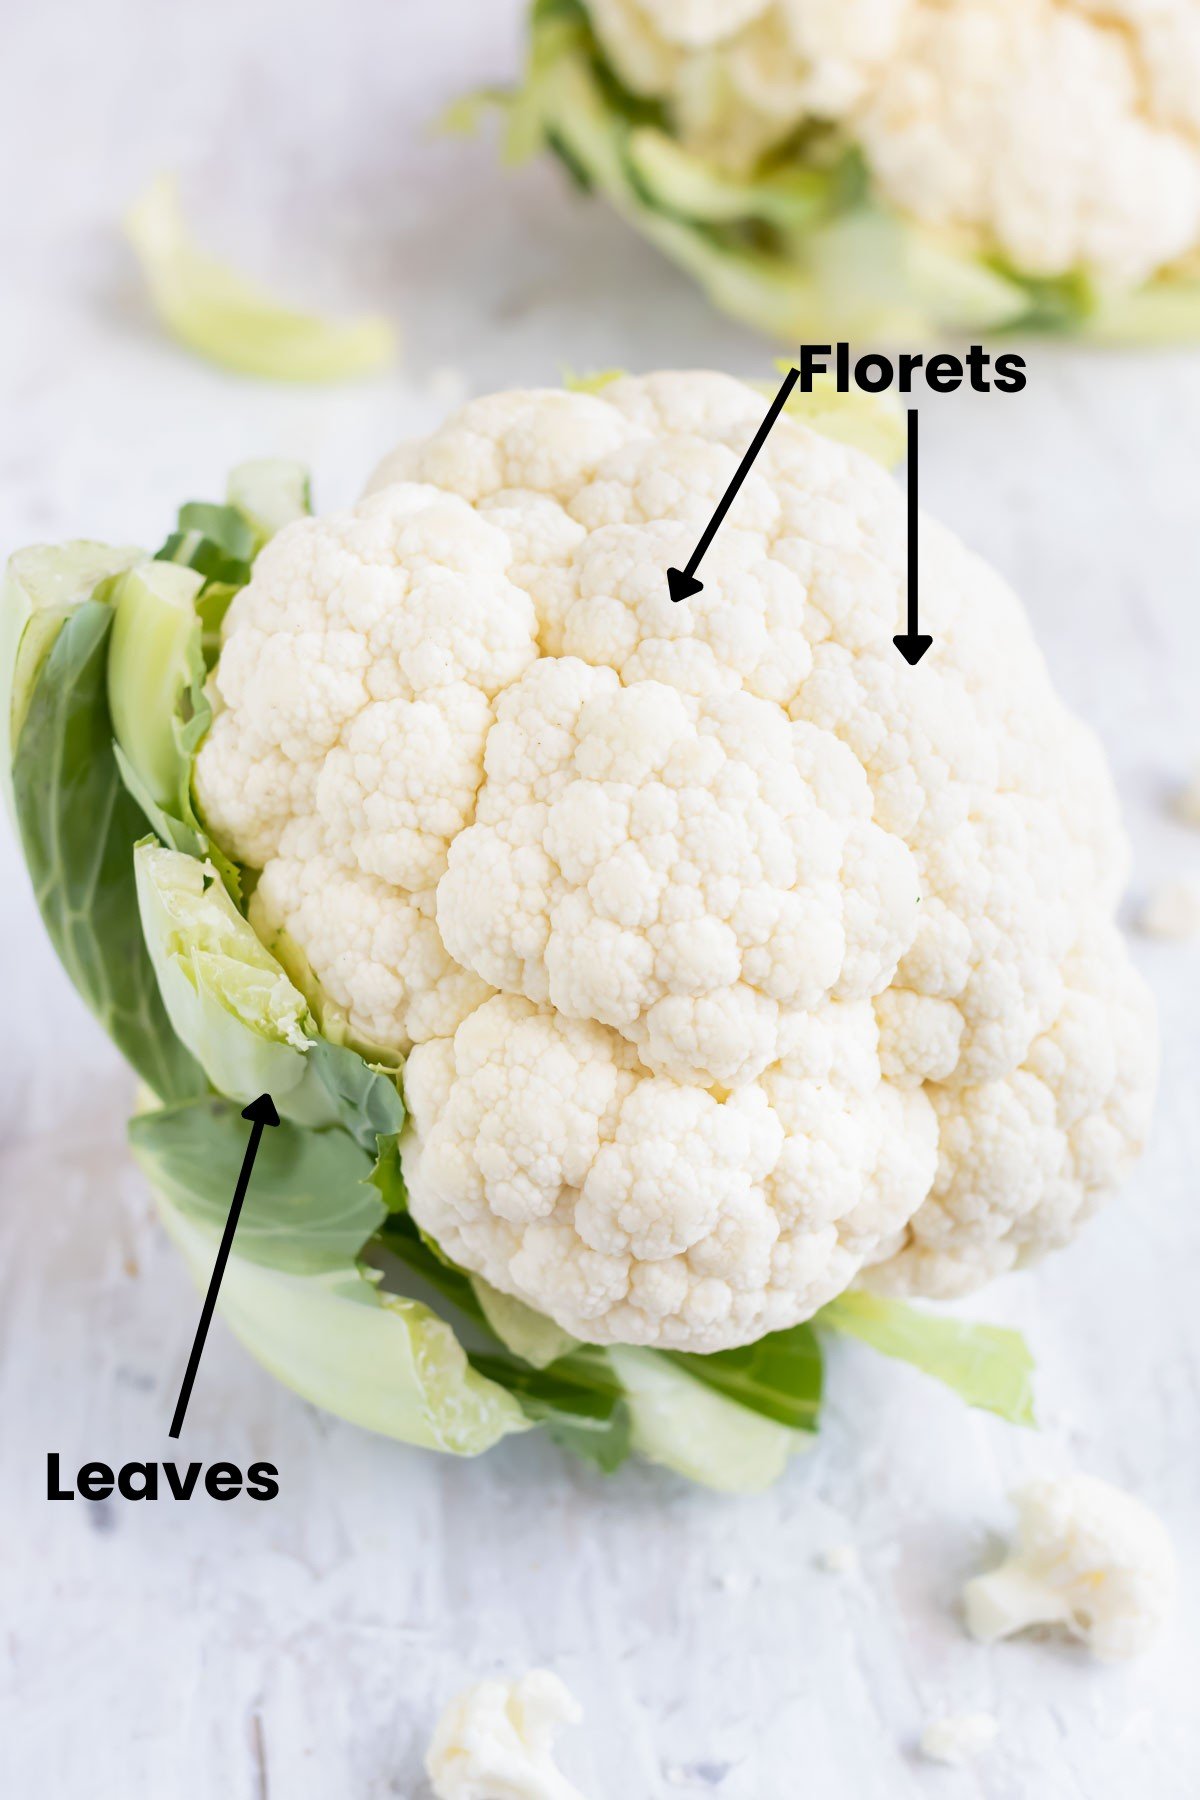 A head of cauliflower with arrows pointing to the florets and the leaves.